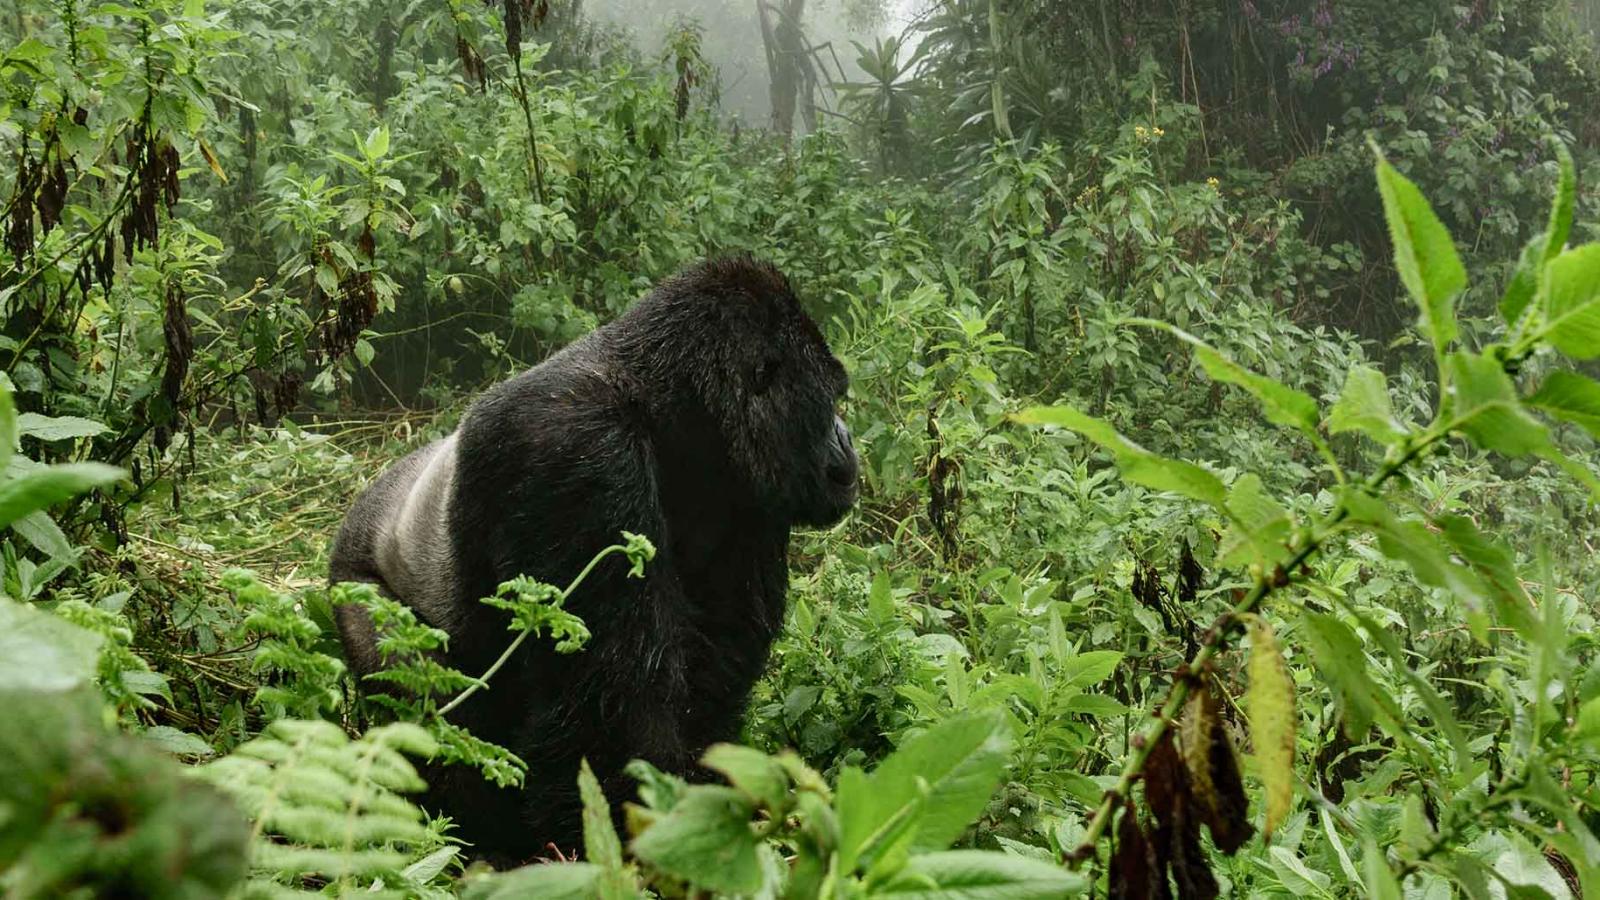 My Dos and Don'ts for gorilla trekking